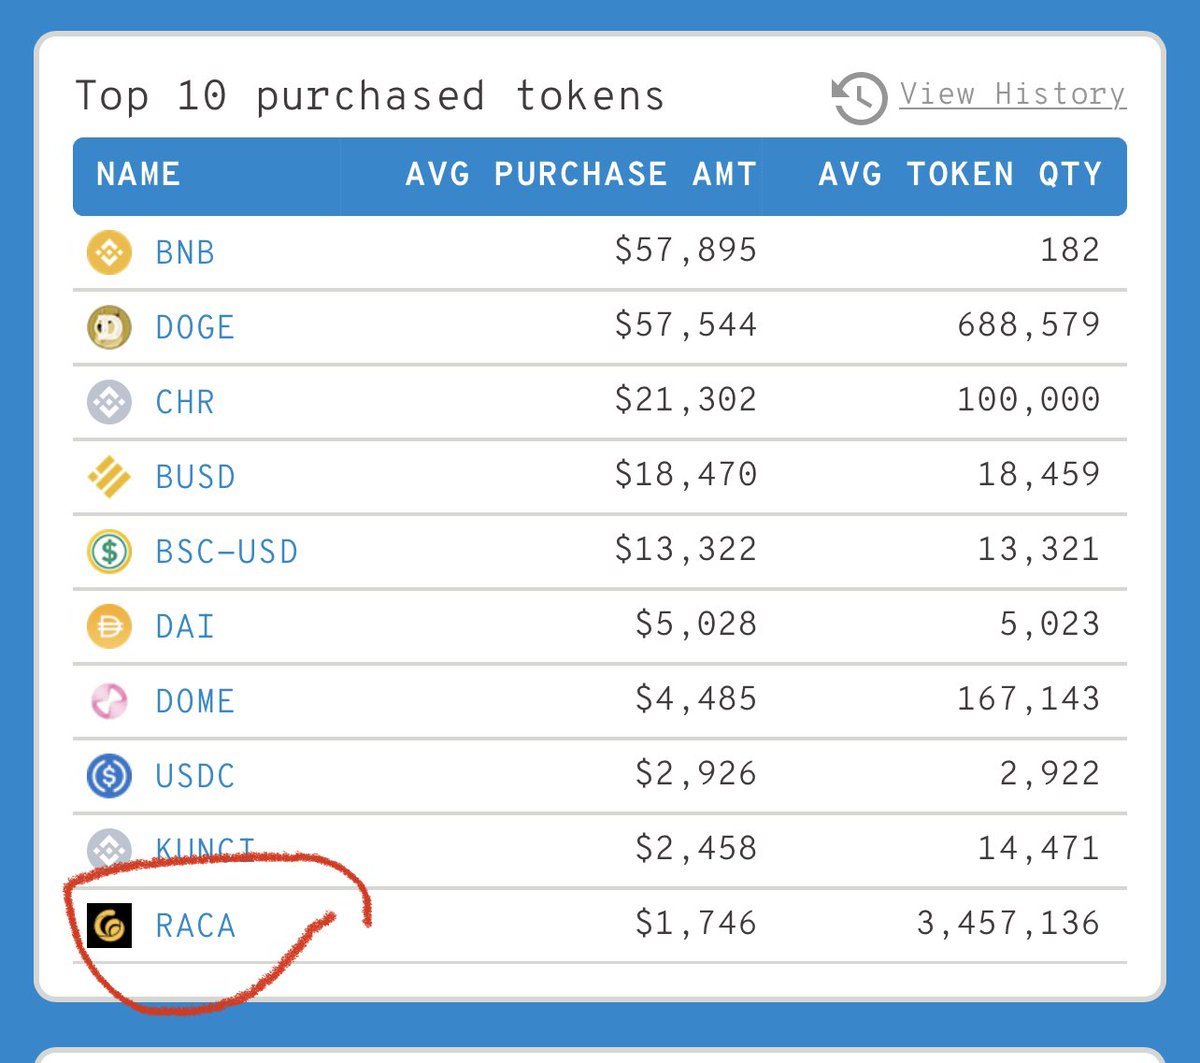 JUST IN: $RACA @RadioCacaNFT now on top 10 purchased tokens among 100 biggest #BSC whales in the last 24hrs. whalestats.com/analysis-of-th… #RACA #Ethereum #racausdt #x1000gem @cz_binance @TheBinanceNFT @RadioCacaNFT @elonmusk @news_of_bsc @binance @RadioCaca_Indo @OpenPFP @opensea